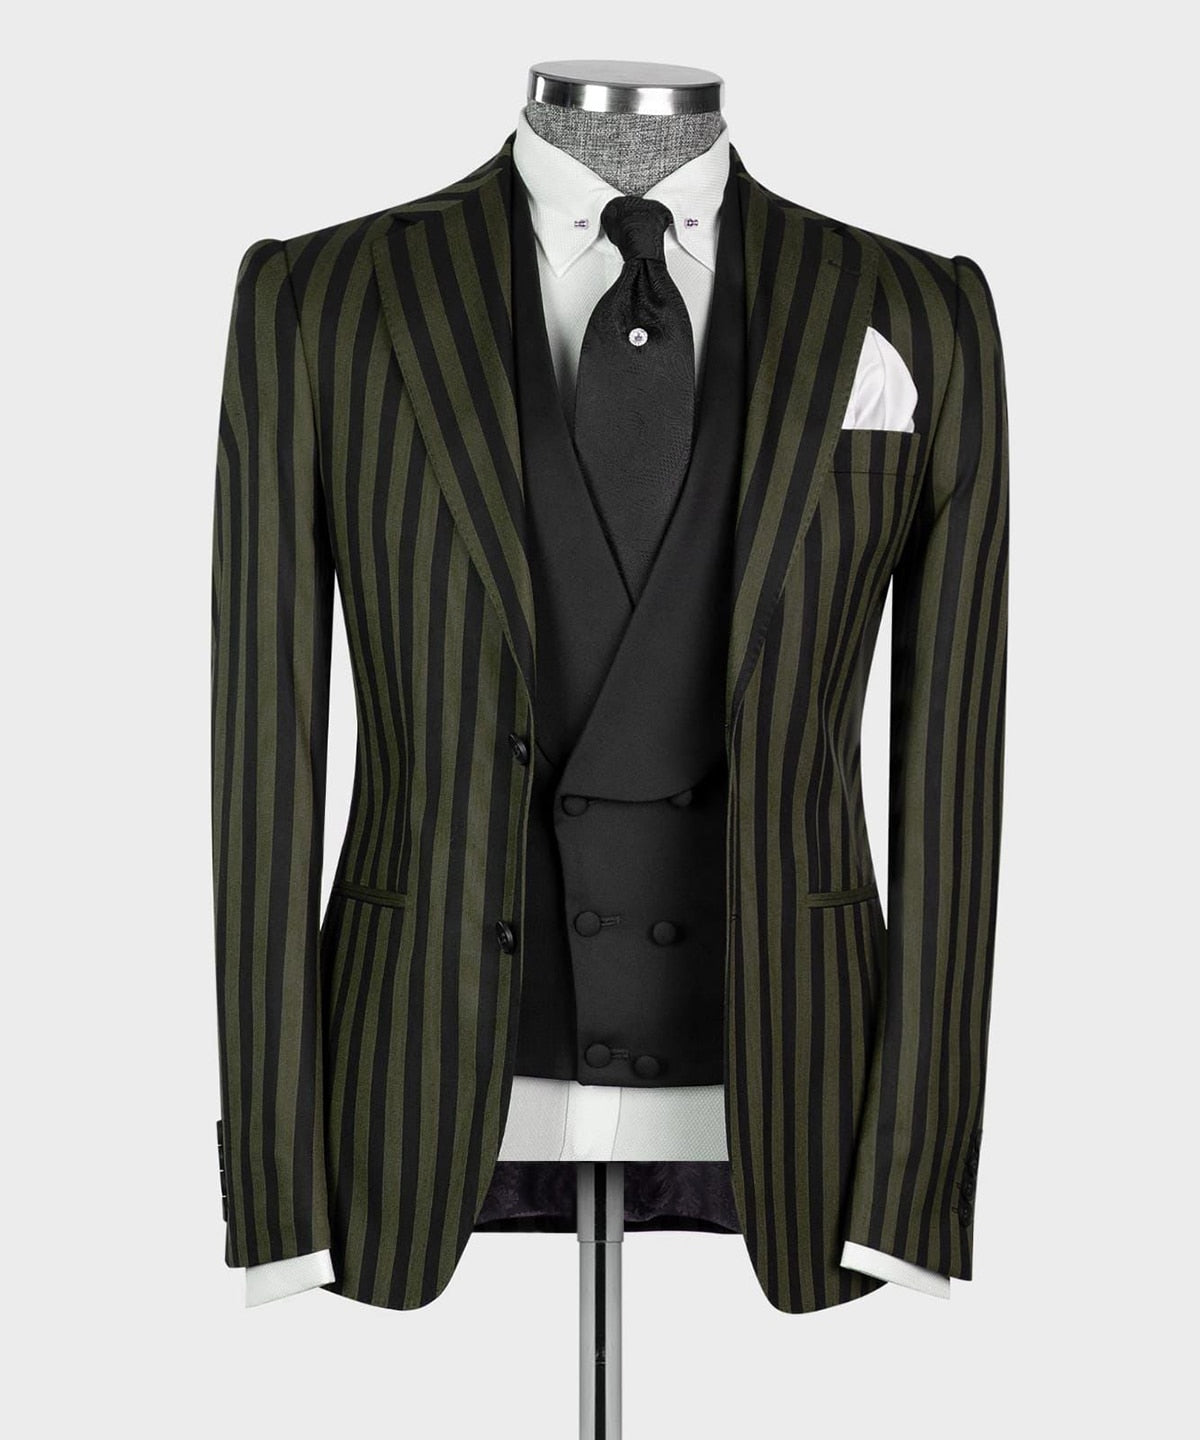 xiangtuibao Men's Suit 3 Pieces Blazer Vest Pants Peaked Lapel Single Breasted Tuxedo Wedding Groom Pinstripes Formal Tailored Costume Homme